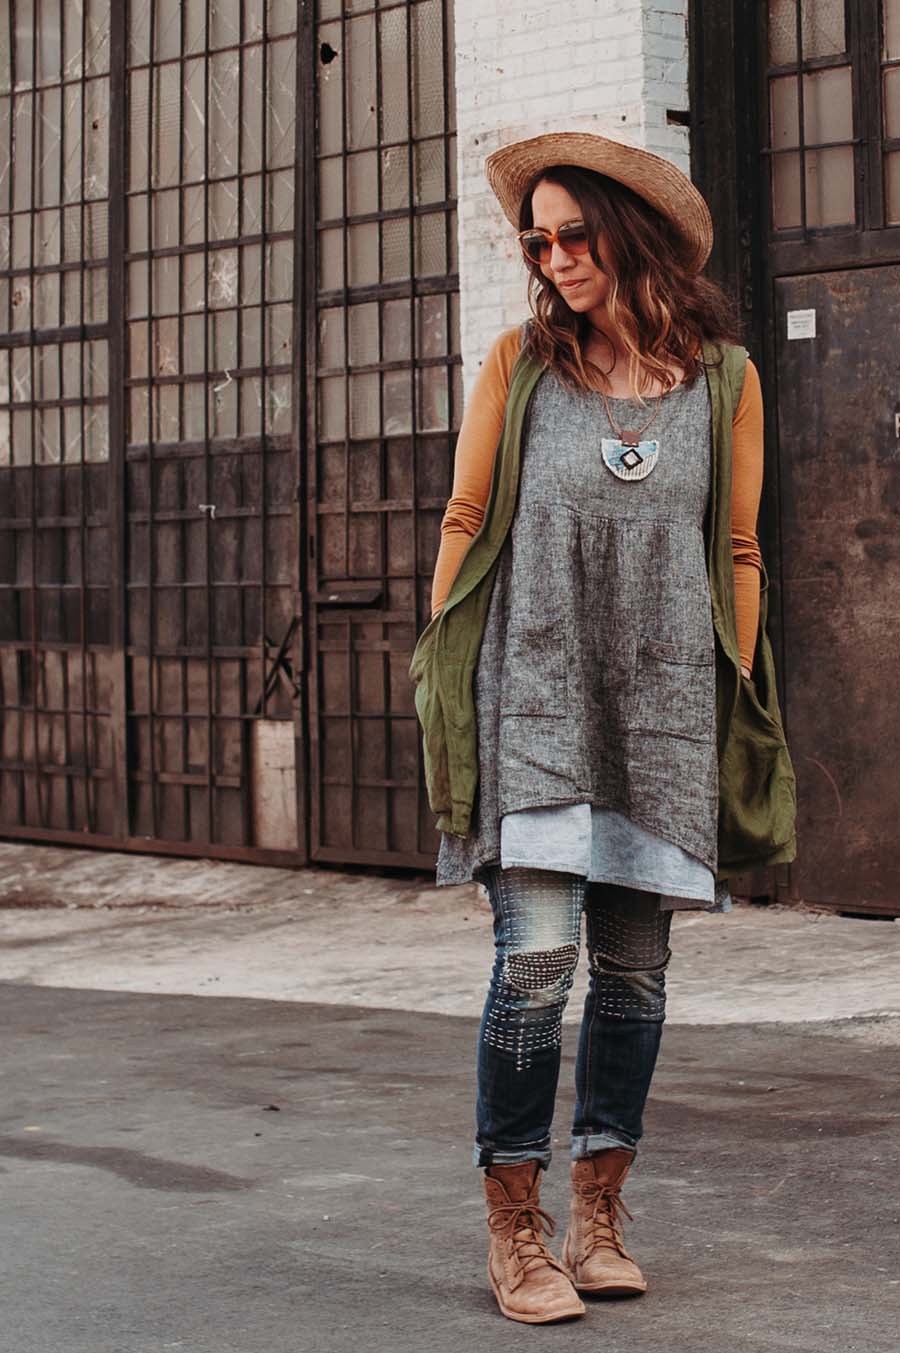 Meg wears a Forager Vest over a Metamorphic Dress and jeans